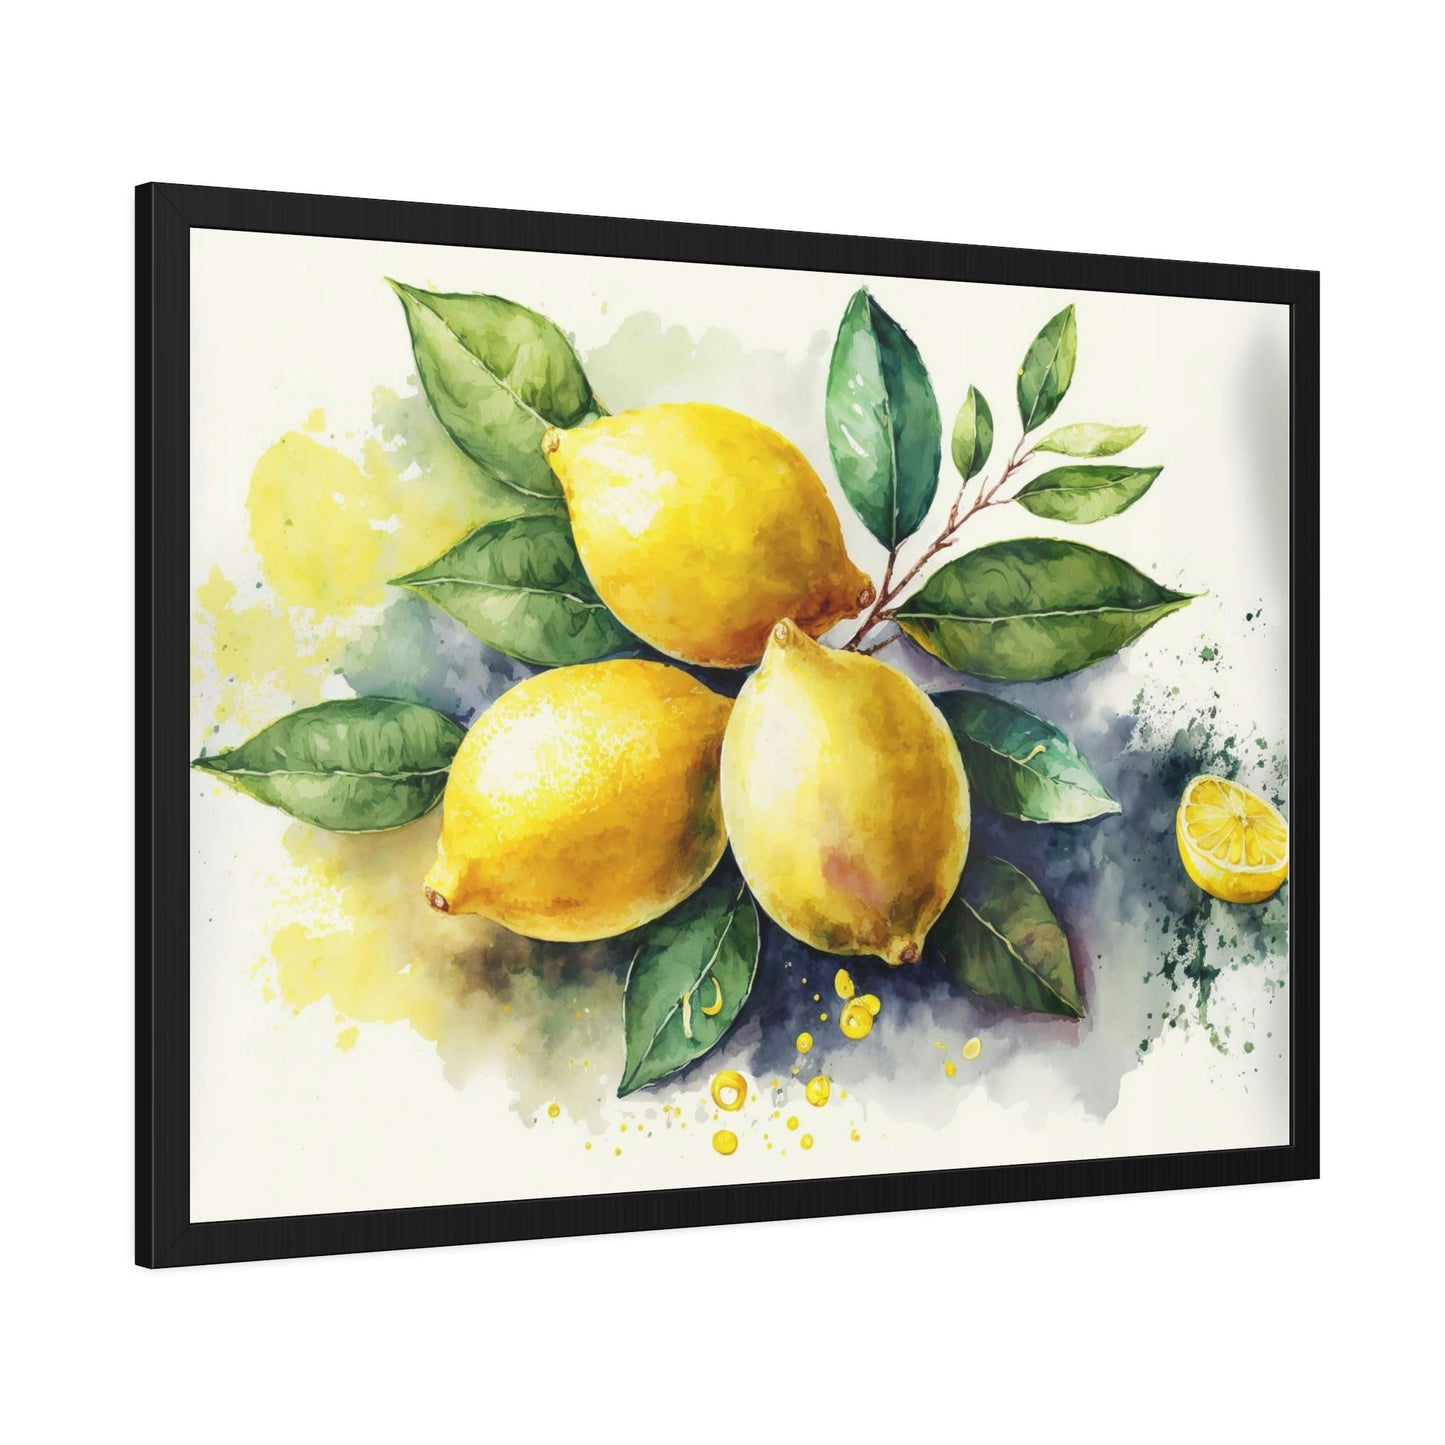 Yellow Zest: Refreshing and Invigorating Canvas Art Prints and Framed Posters Featuring Yellow Lemons